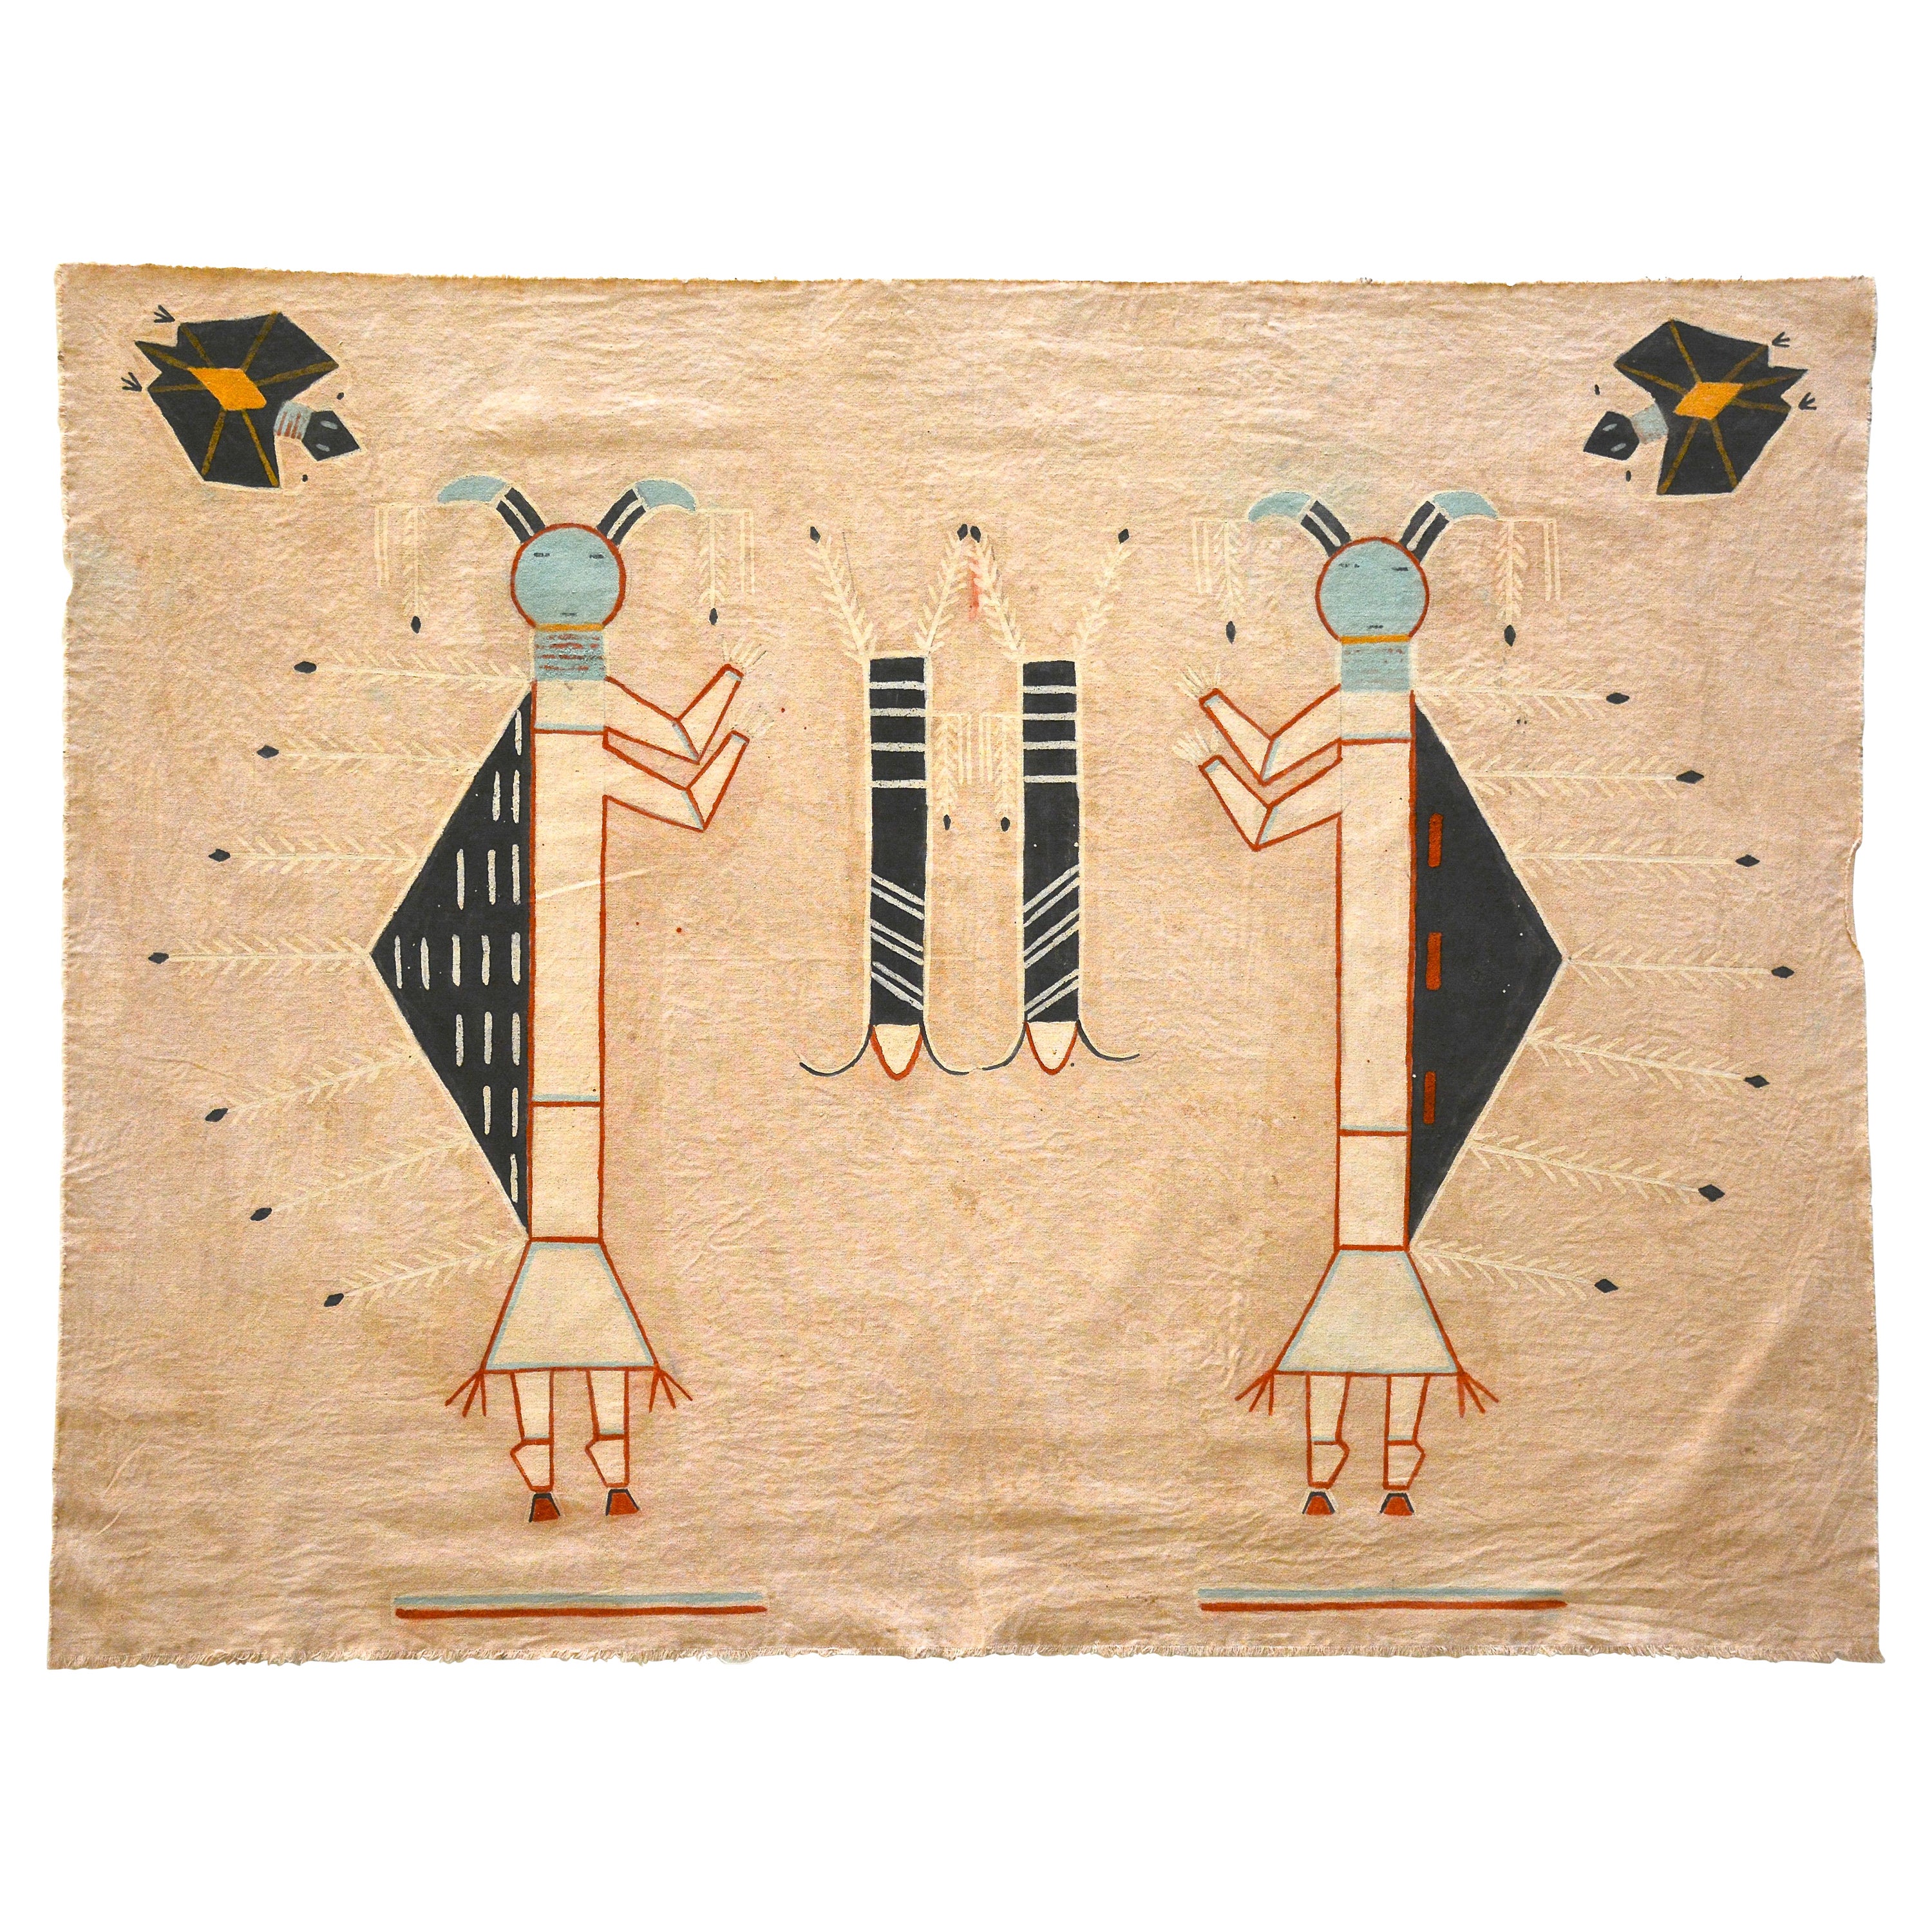 Navajo Picture Writing On Muslin, Two Humpback Yeis with Two Bat Guardians